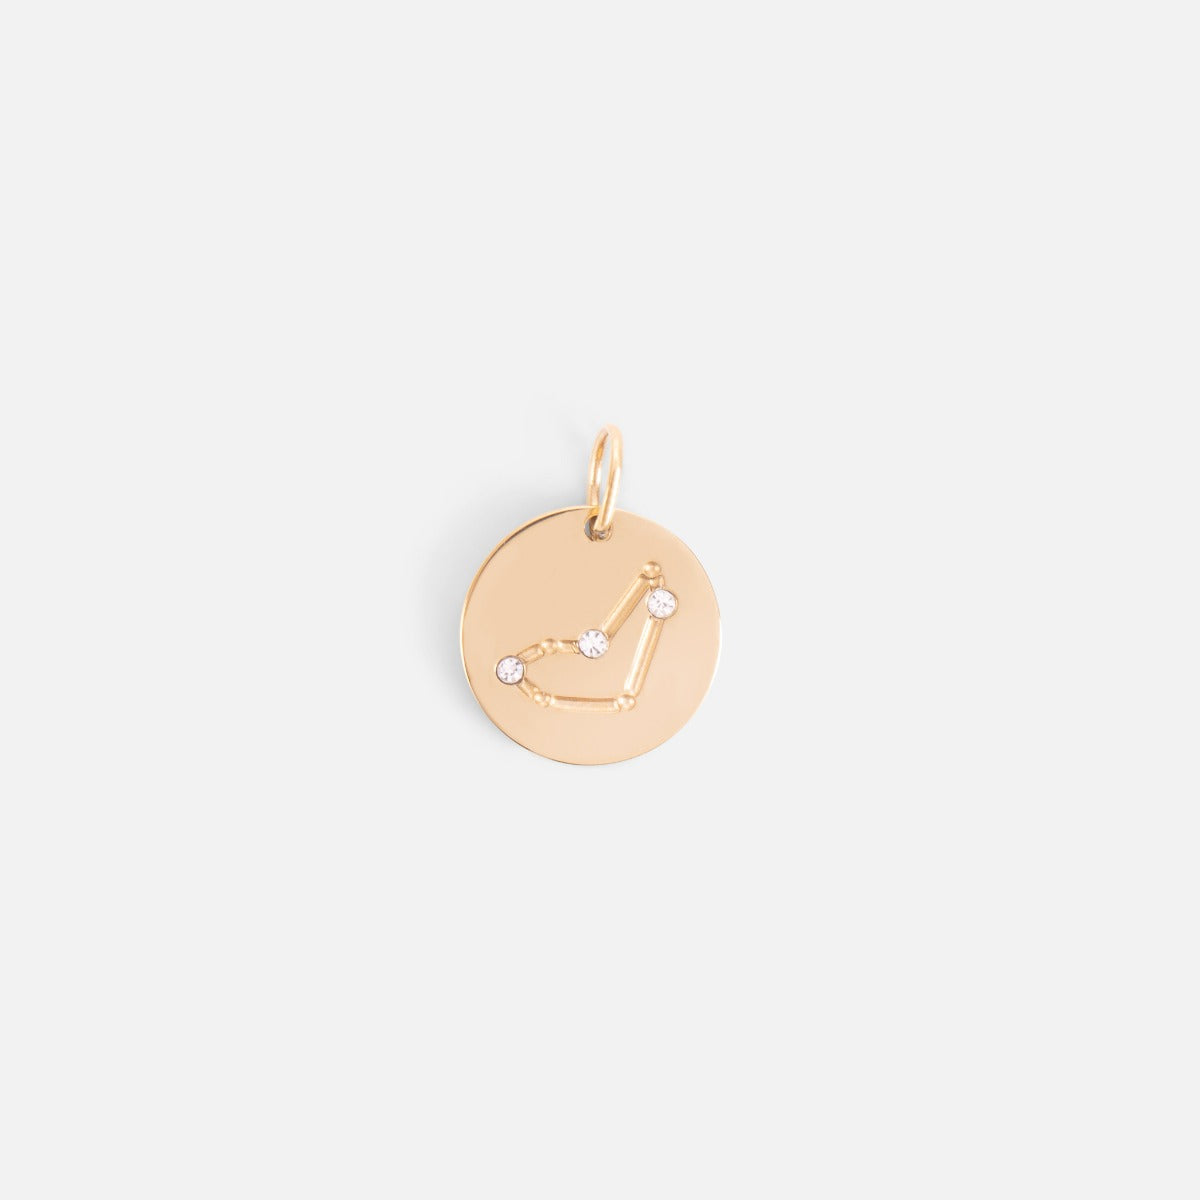 Small golden charm engraved with the zodiac constellation "capricorn"